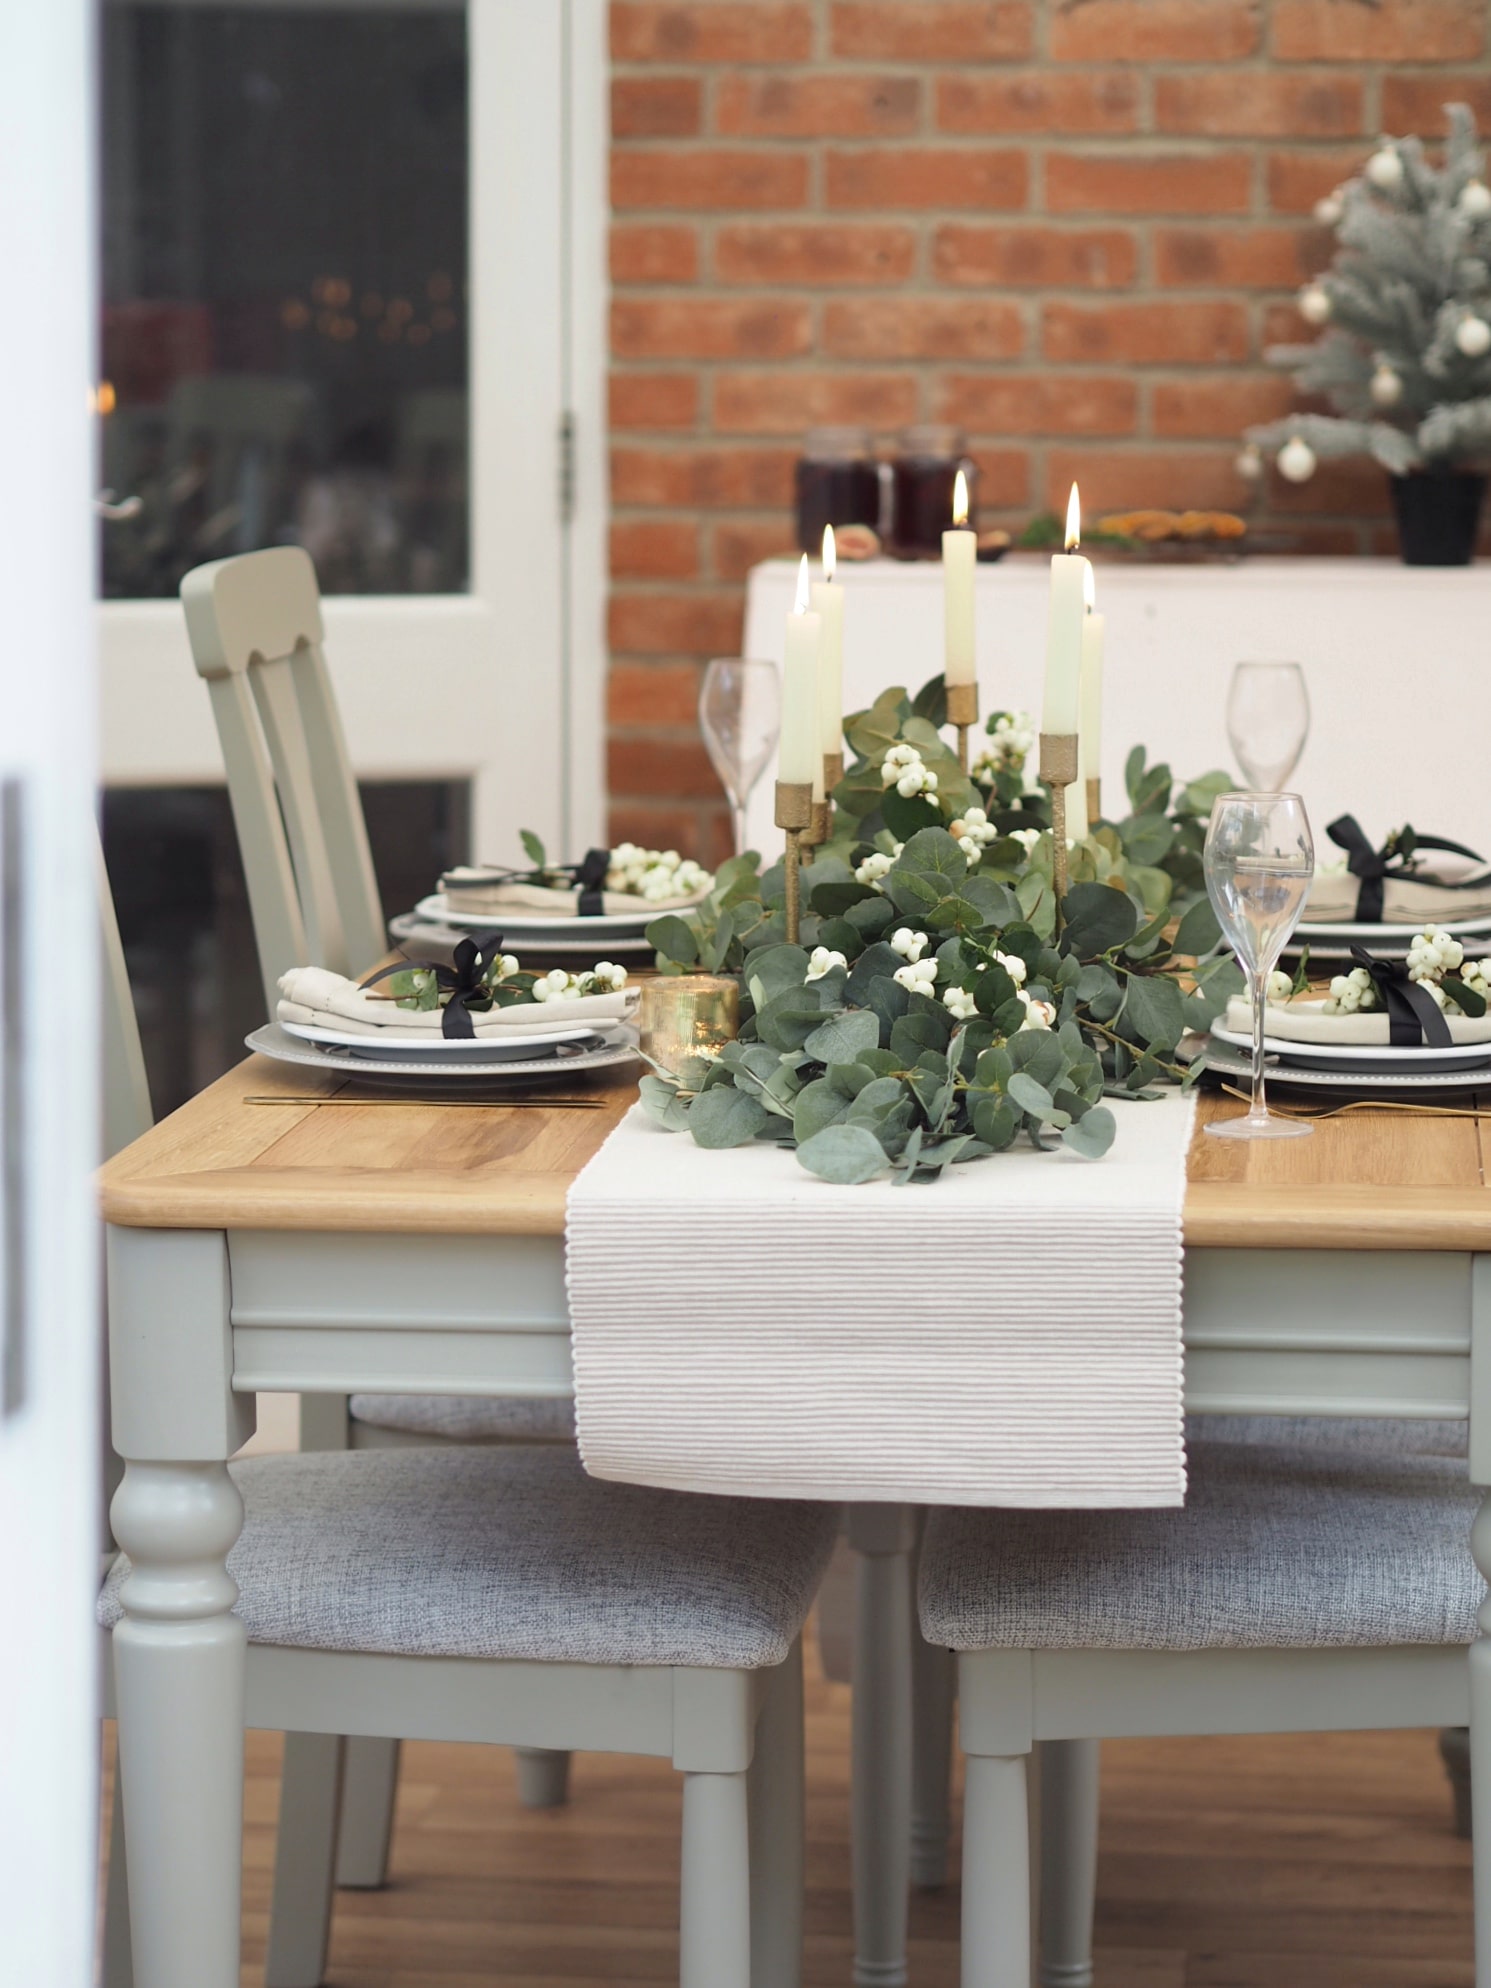 Christmas dining table decor, how to create a garland from faux eucalyptus stems to DIY a budget show-stopping display at home for your Christmas meal